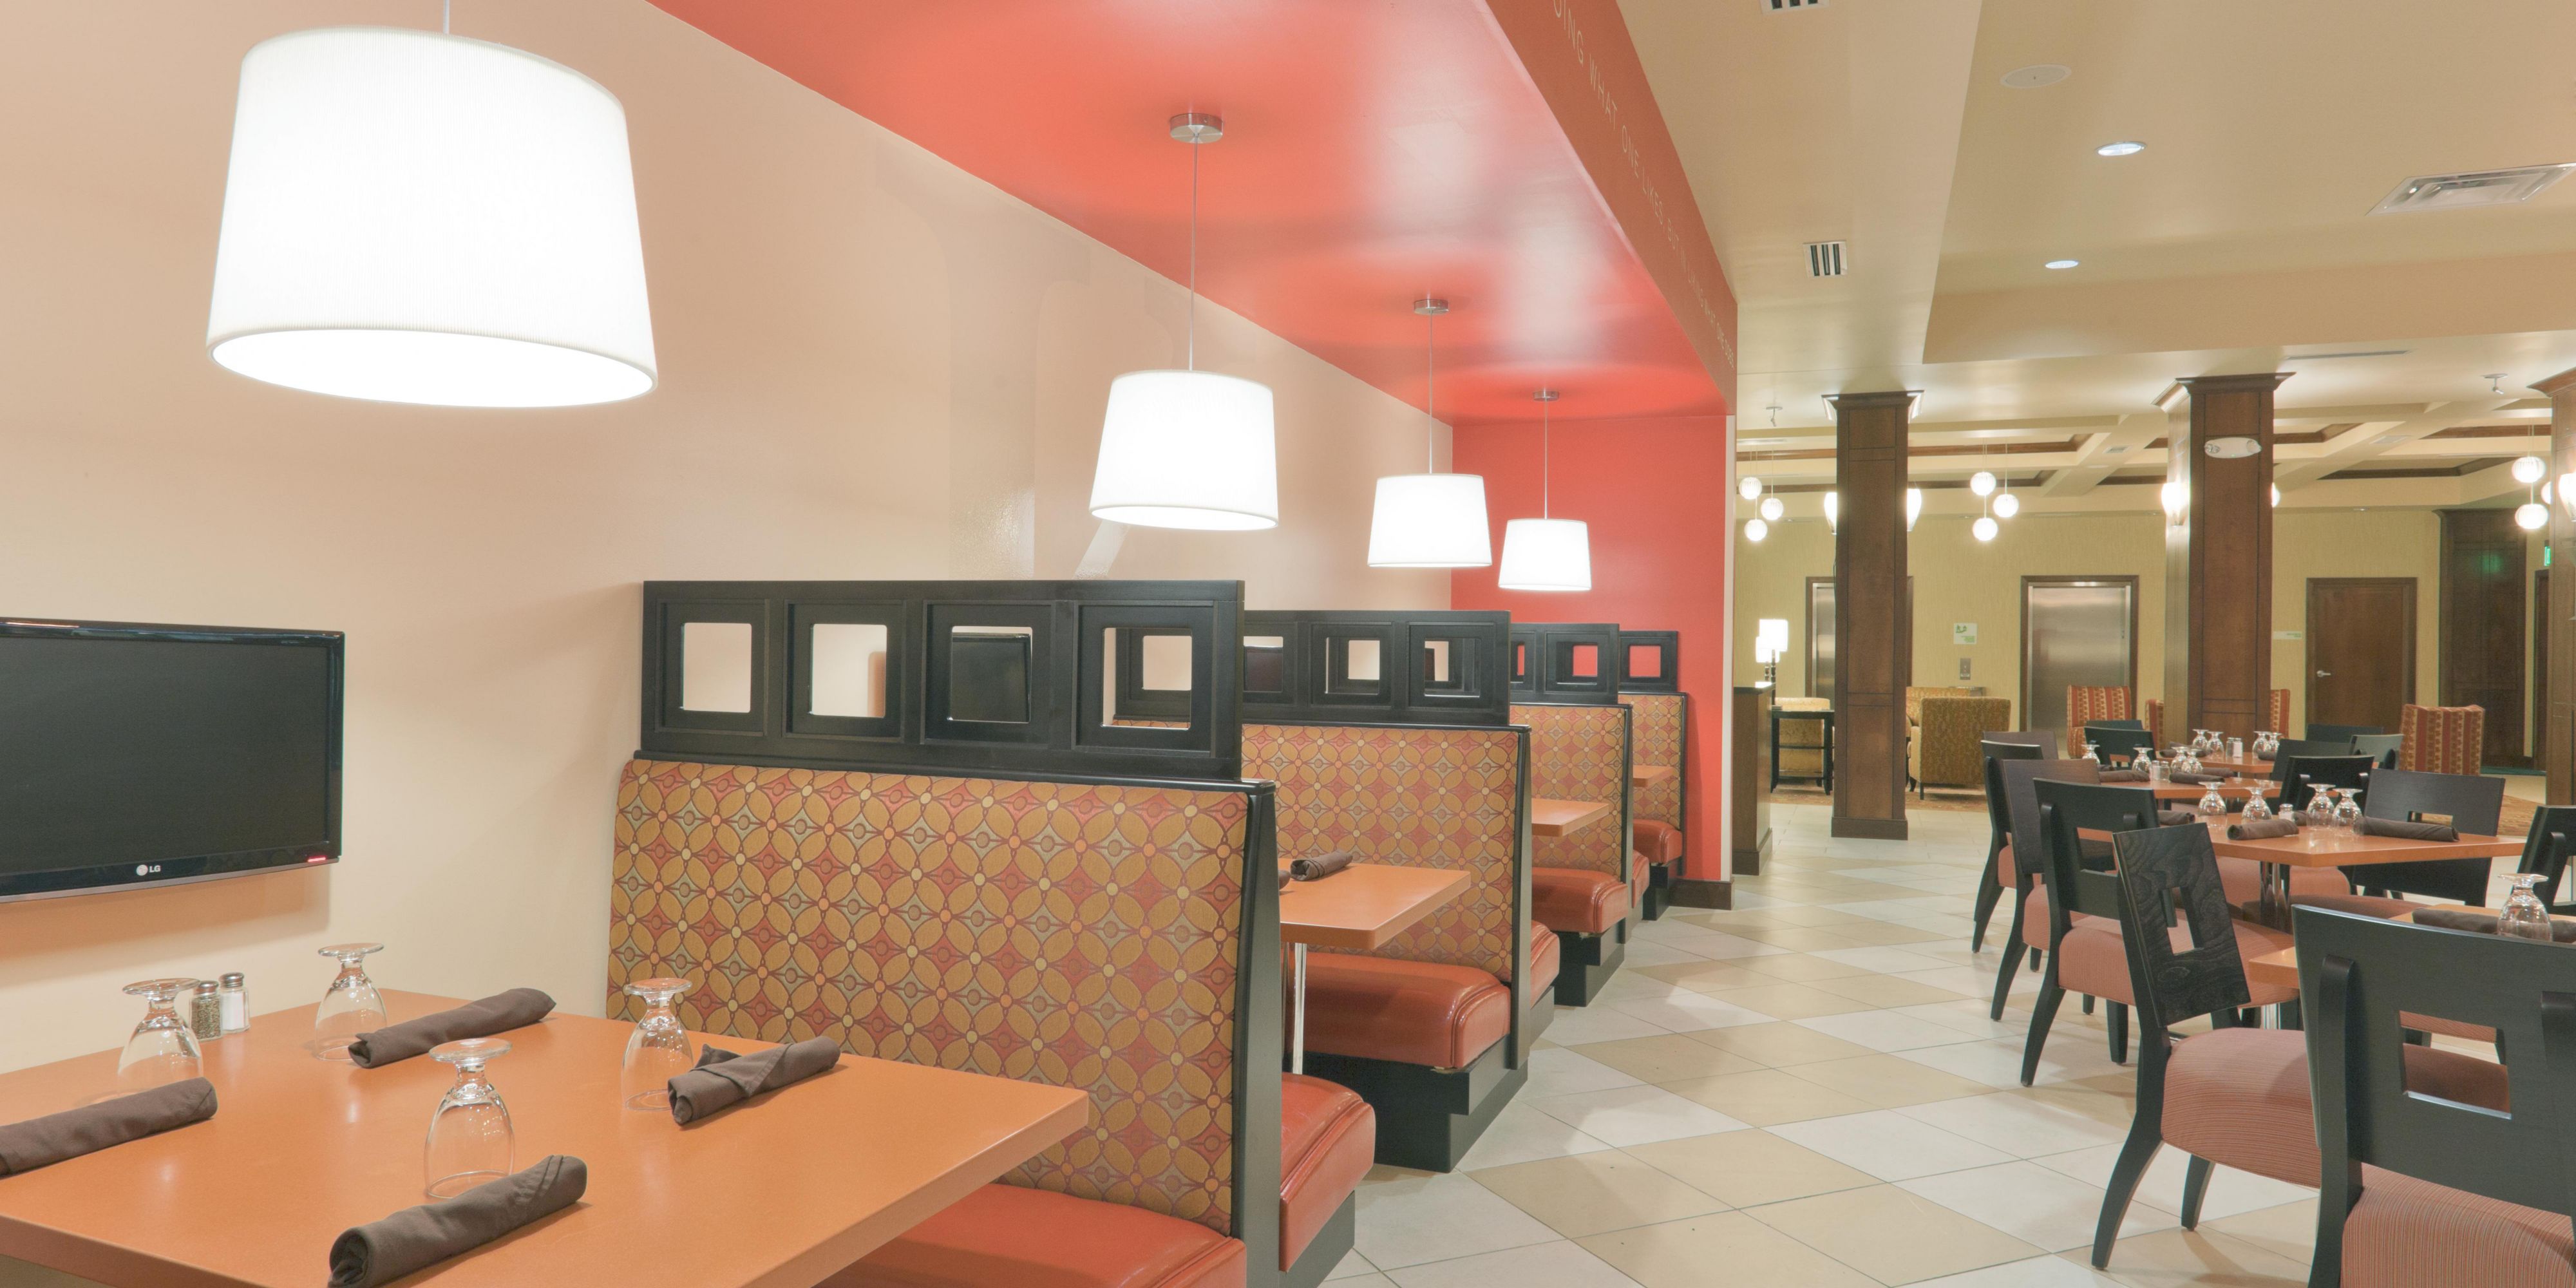 Plenty of seating that will perfectly accompany any meal.